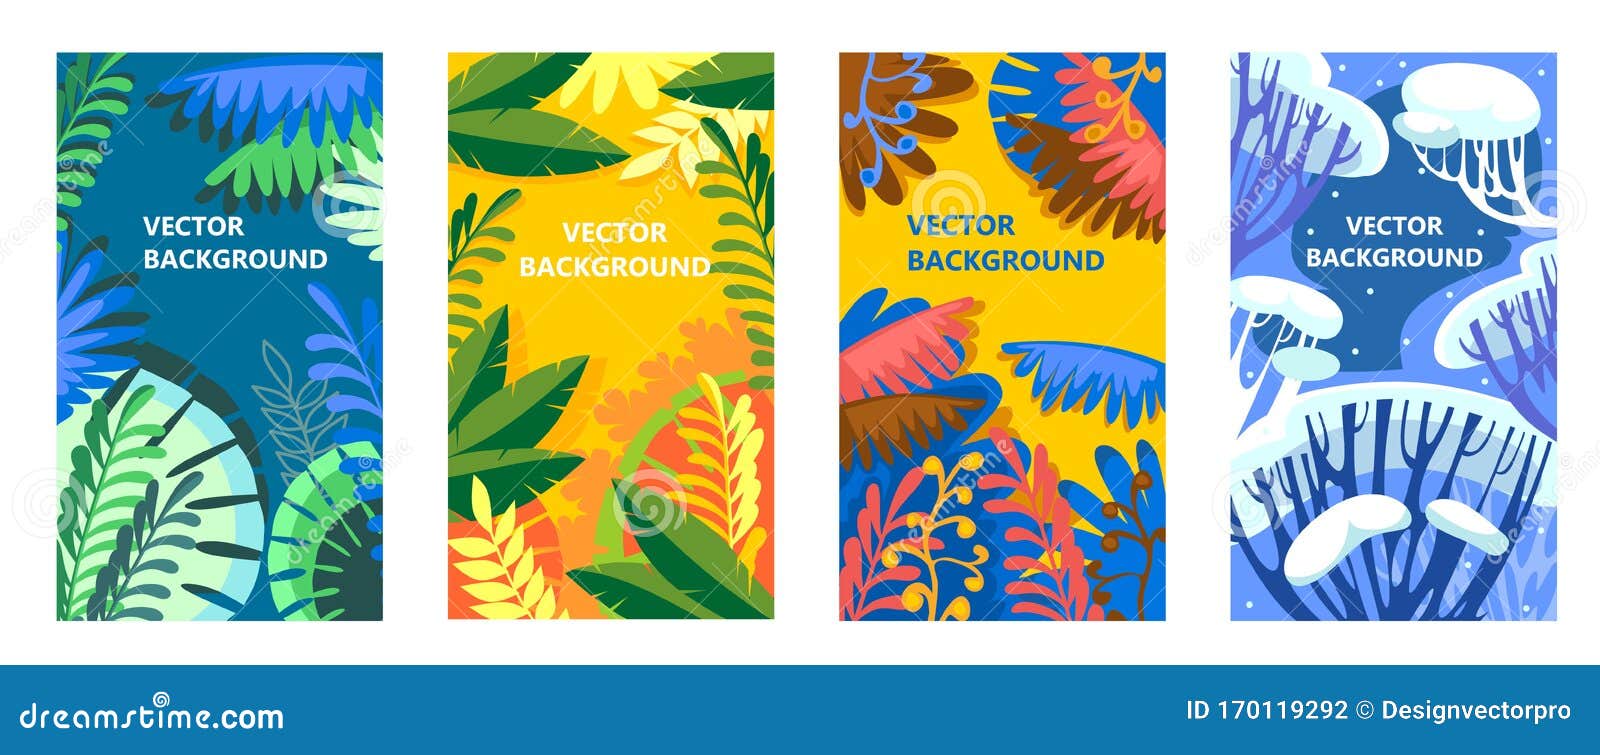 seasonal backgrounds with trees and leaves set